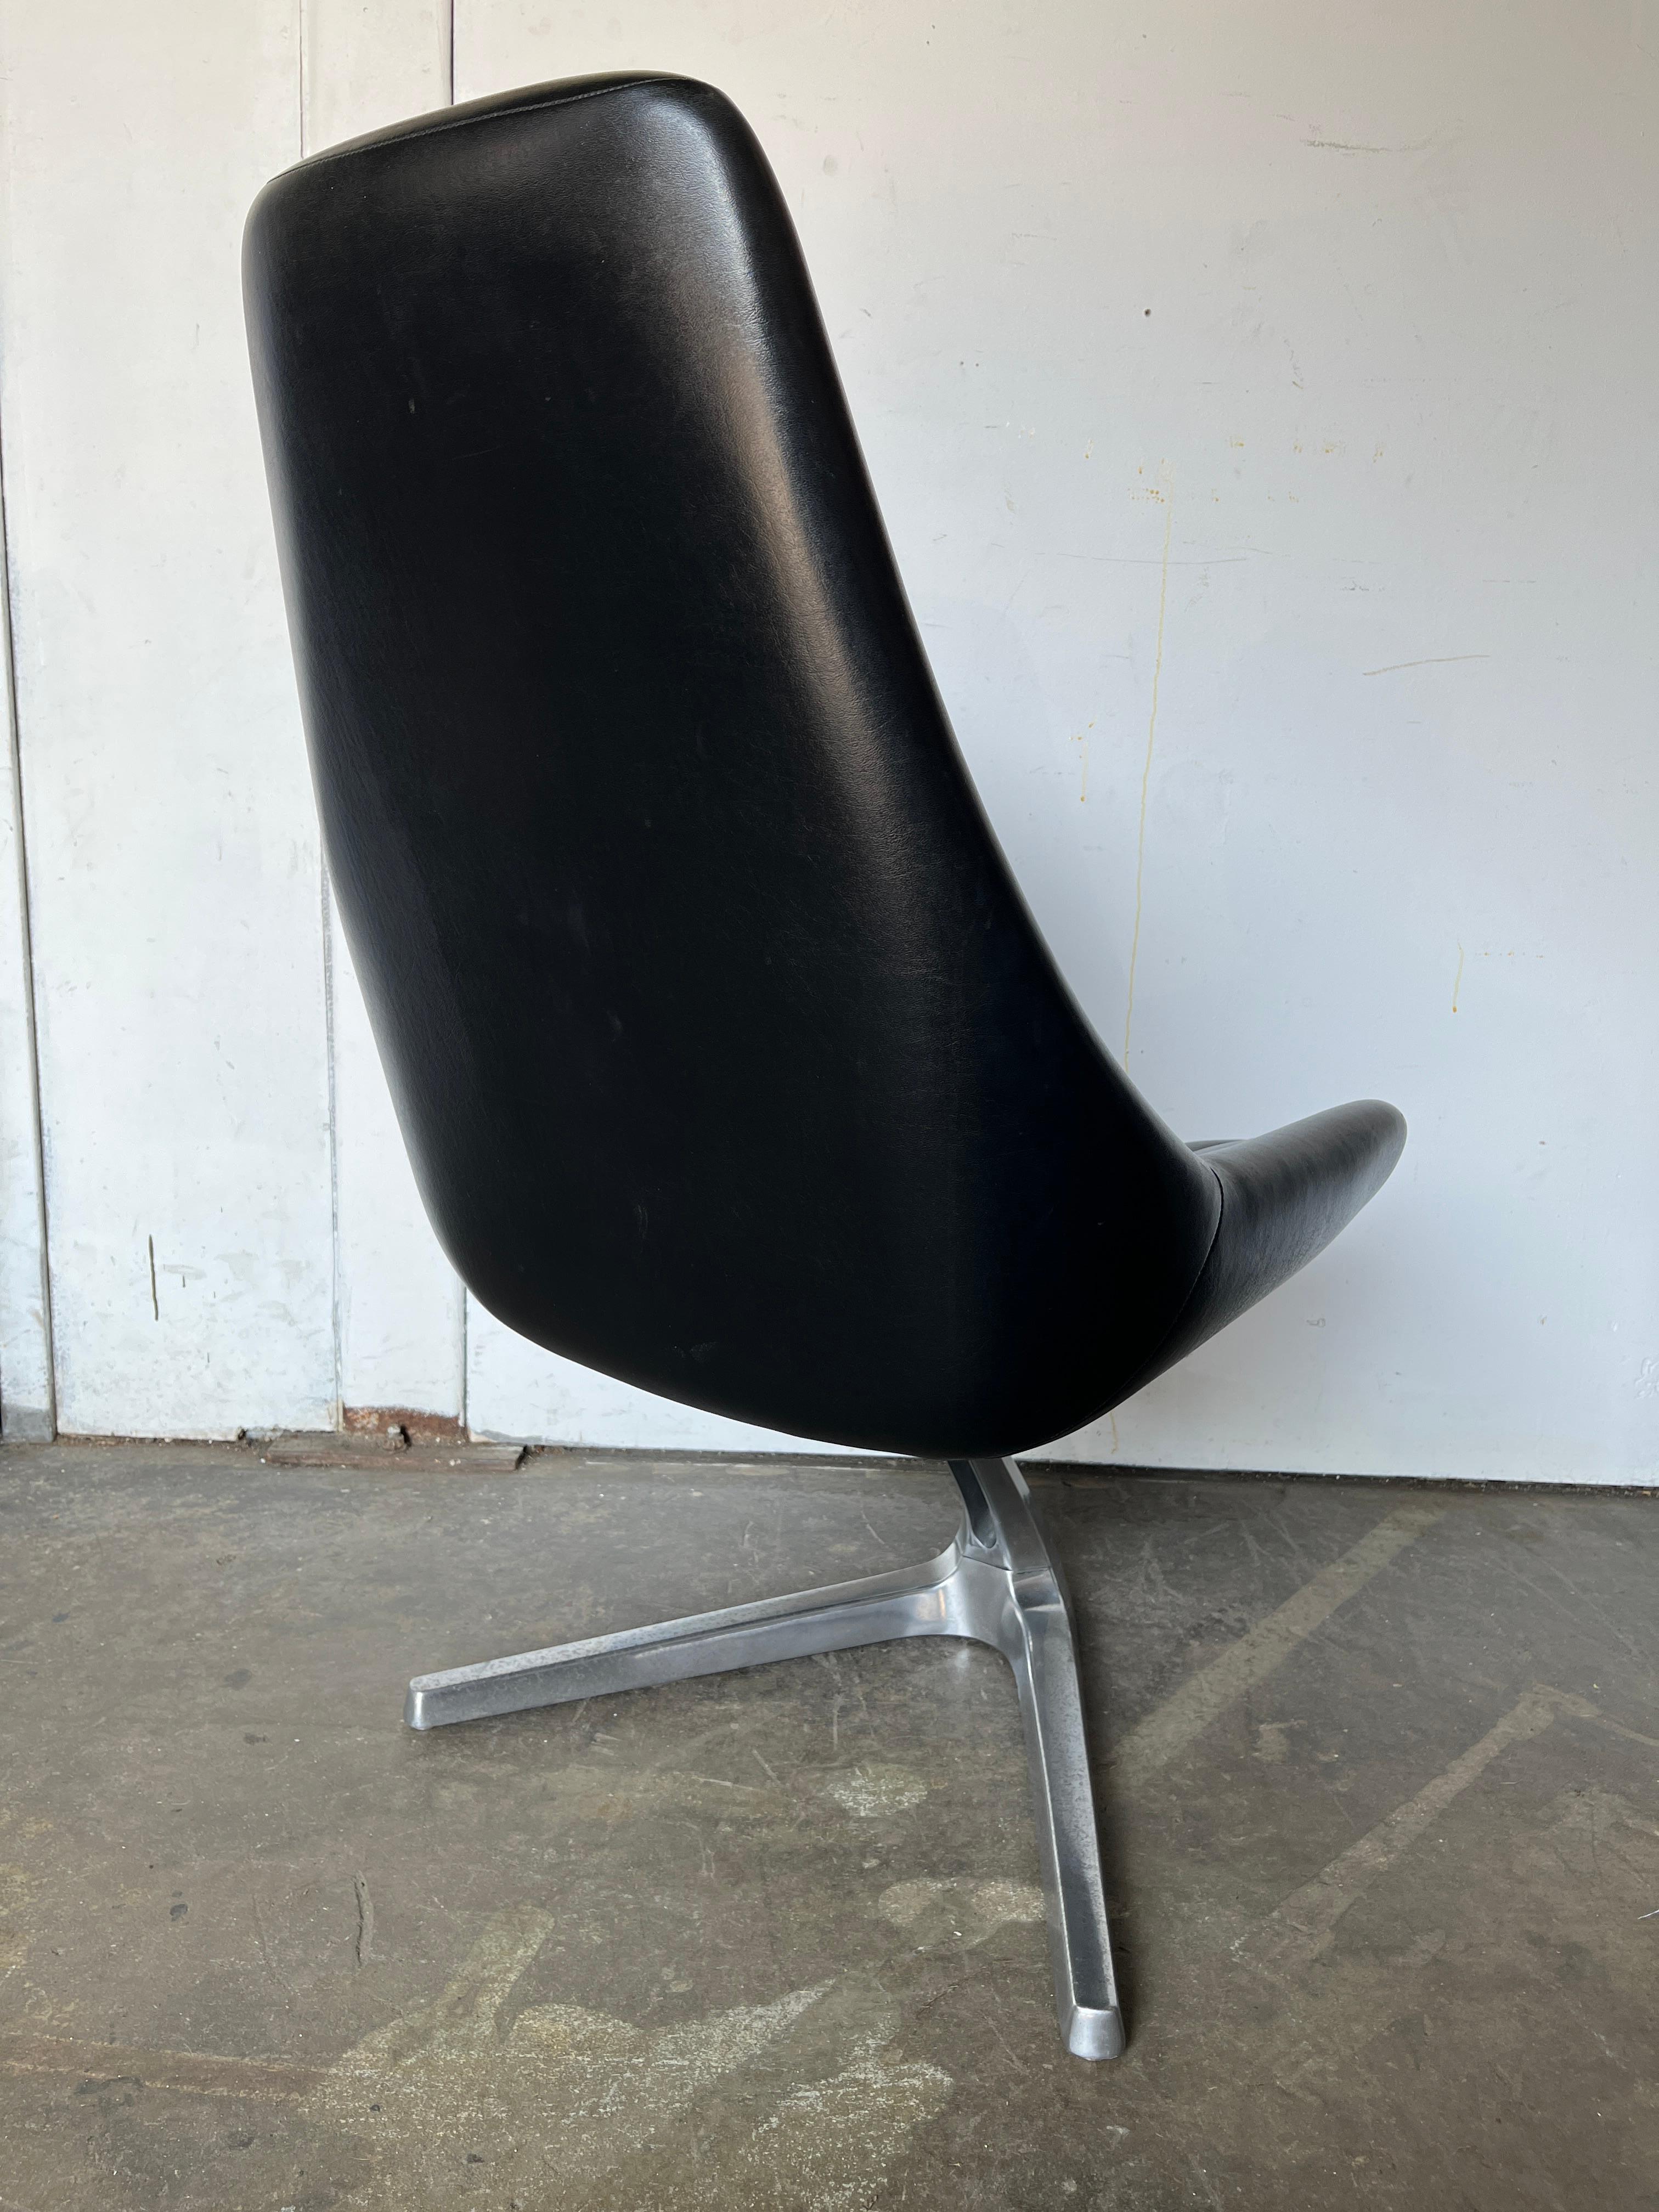 Midcentury 'Star Trek' Sculpta Swivel Chairs by Chromcraft (two available) 3